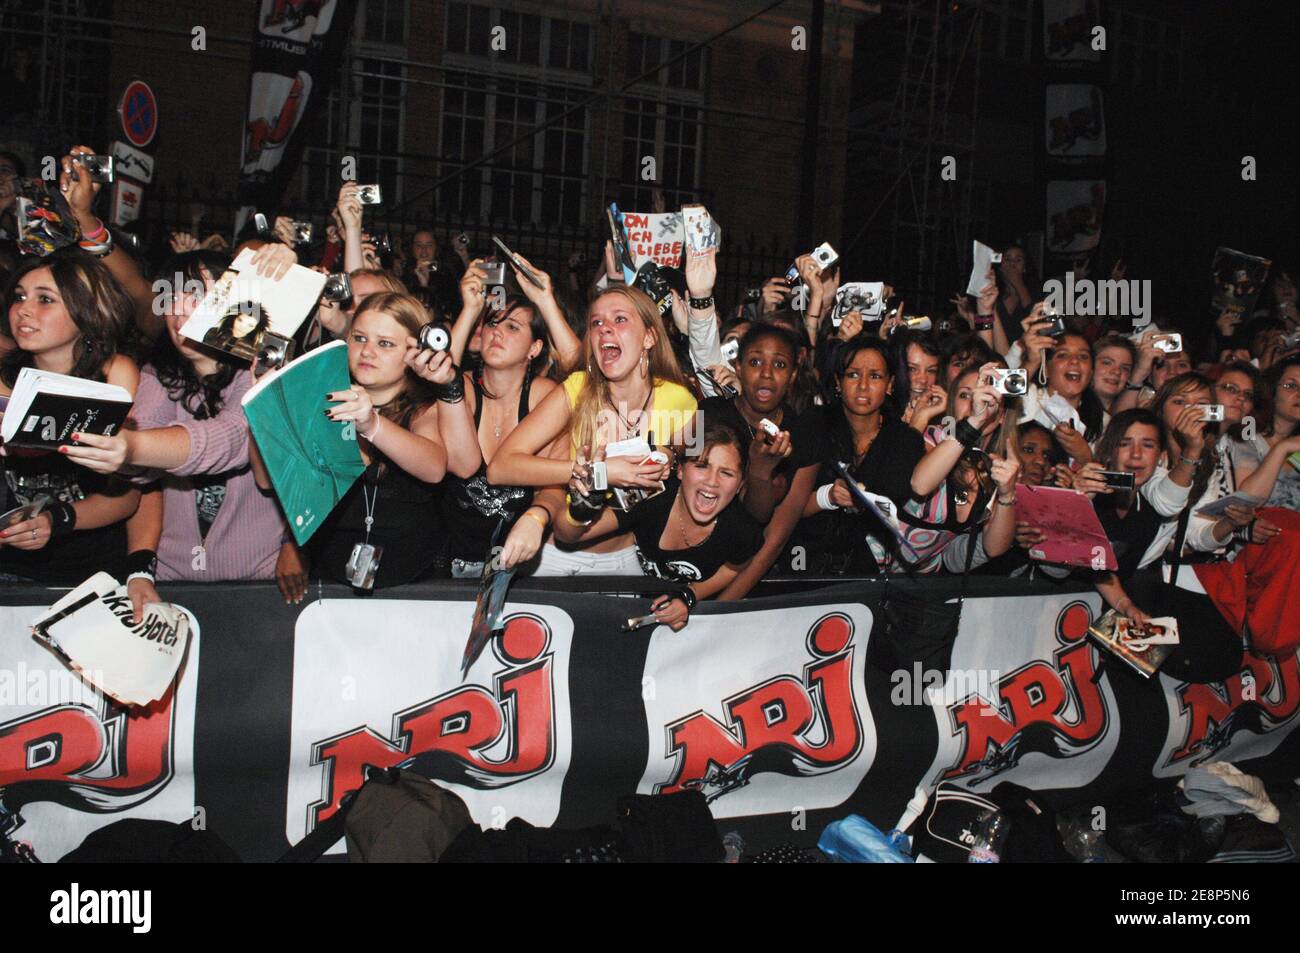 Hysterical French fans of German rock band 'Tokio Hotel' are gathered  outside of NRJ radio station's headquarters in Paris, France, on September  14, 2007. The fans are waiting for the band to